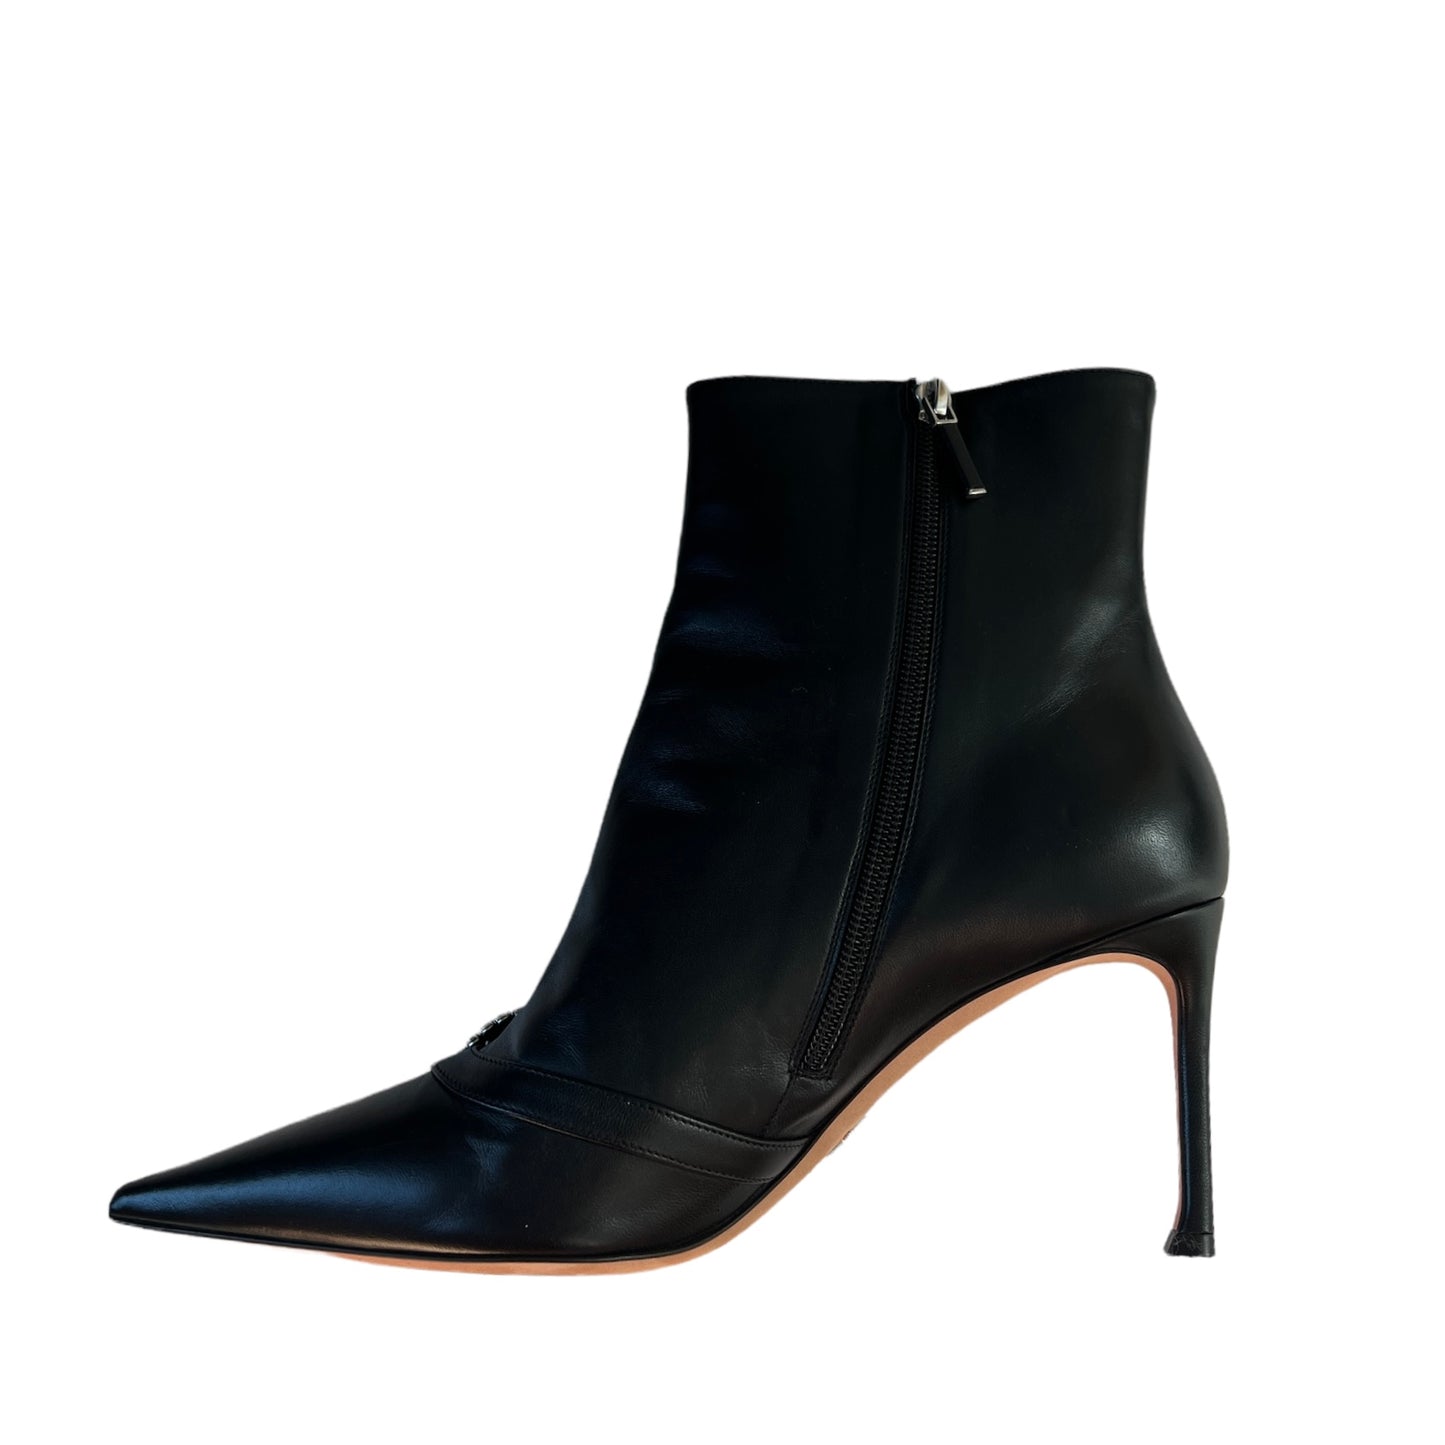 Black Leather Ankle Boots - 11